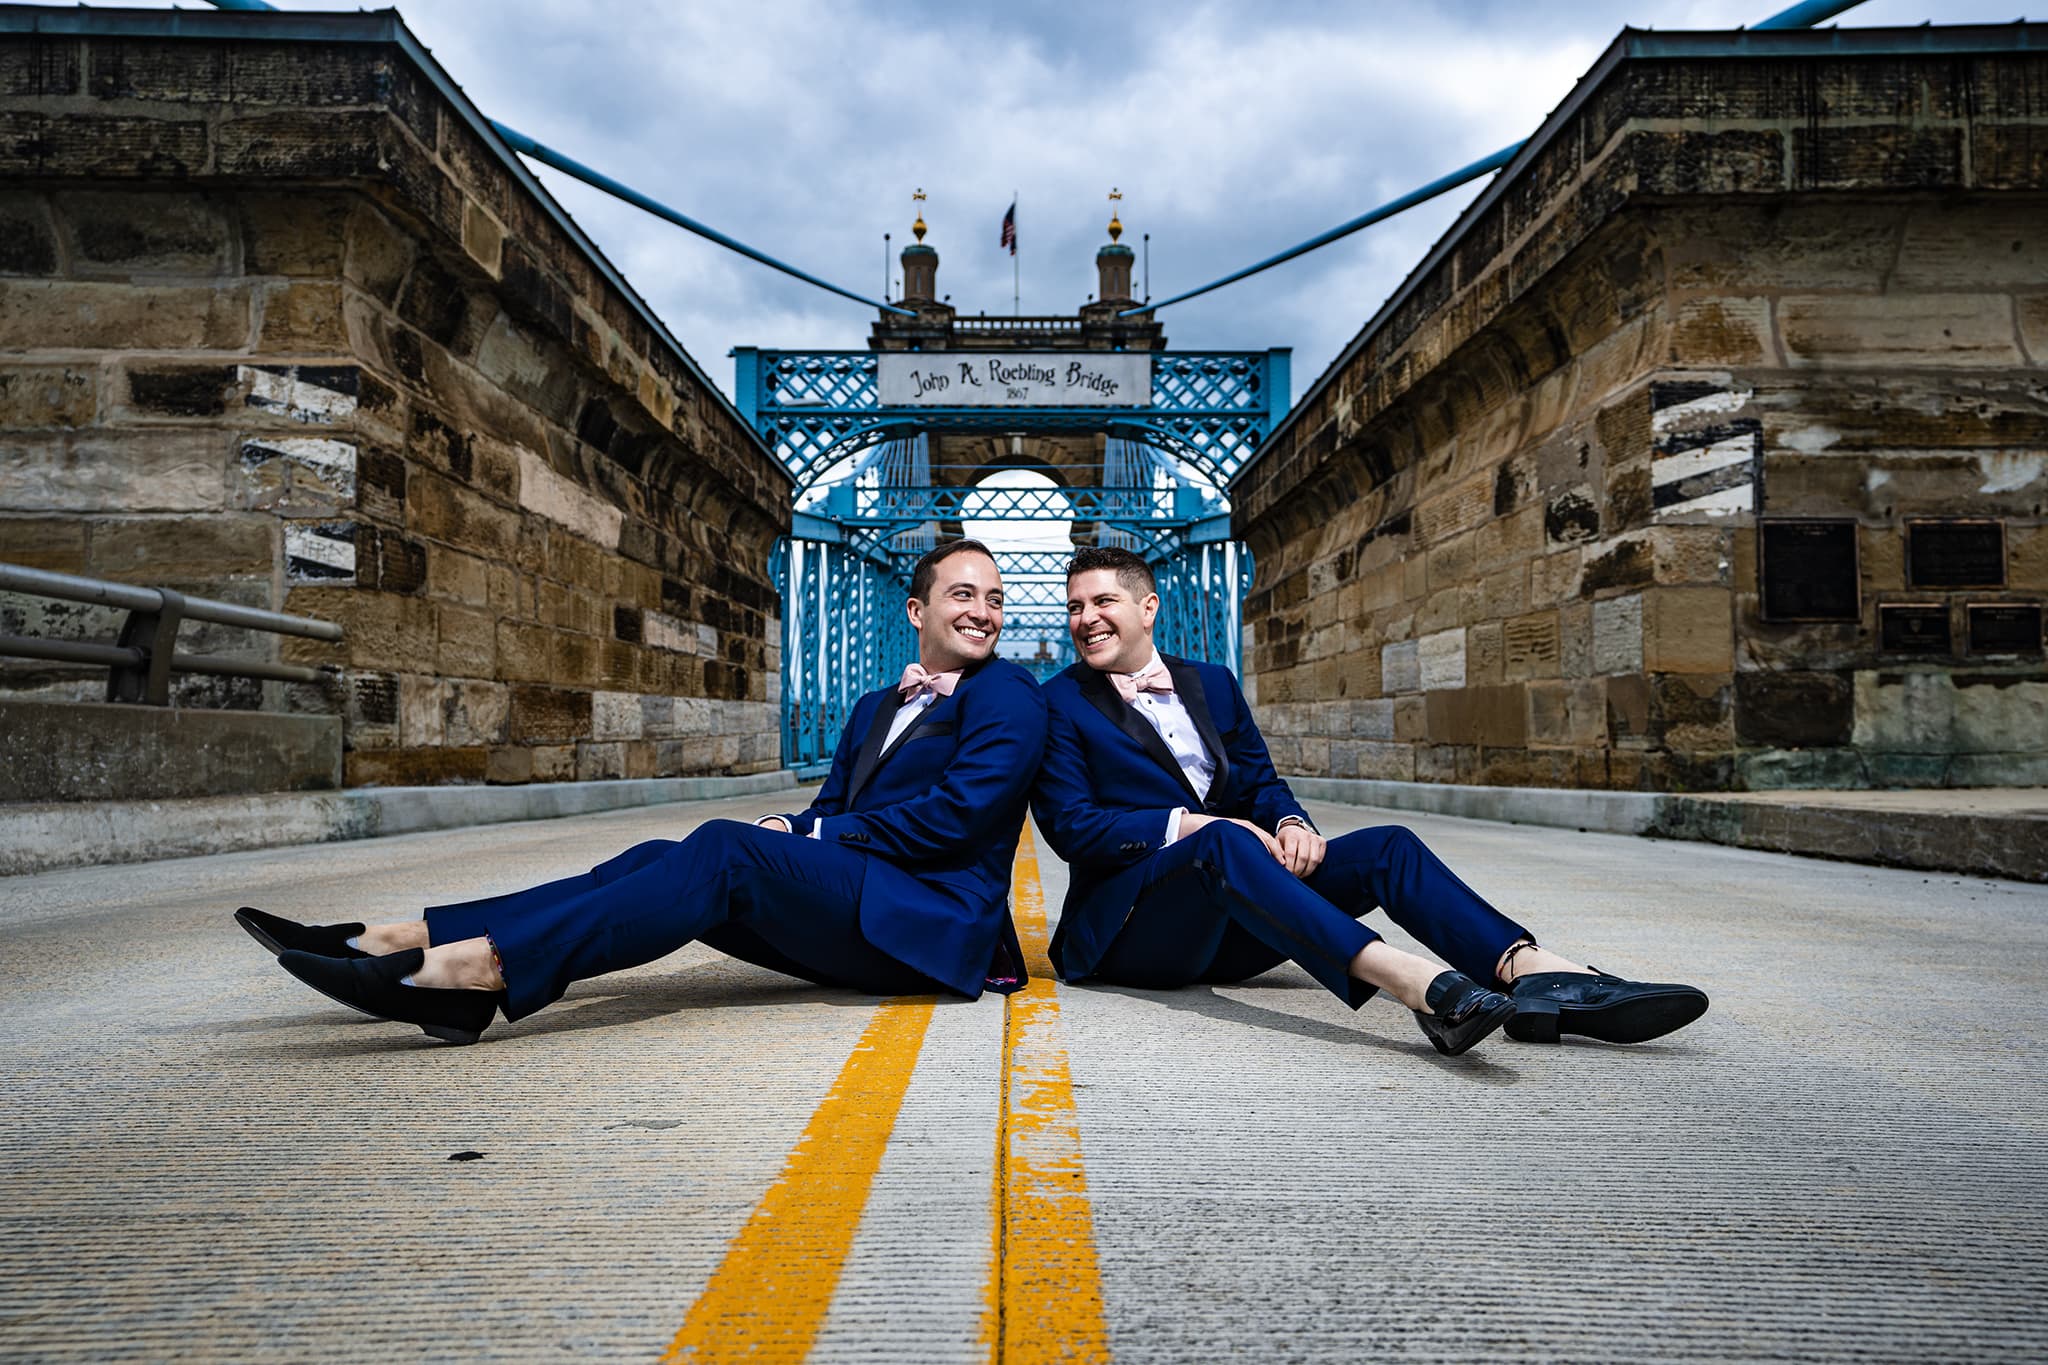 Two grooms sit on the Roebling Bridge in Cincinnati, Ohio before their Jewish wedding ceremony at the Renaissance Hotel in downtown Cincinnati. Photo by Studio 22 Photography